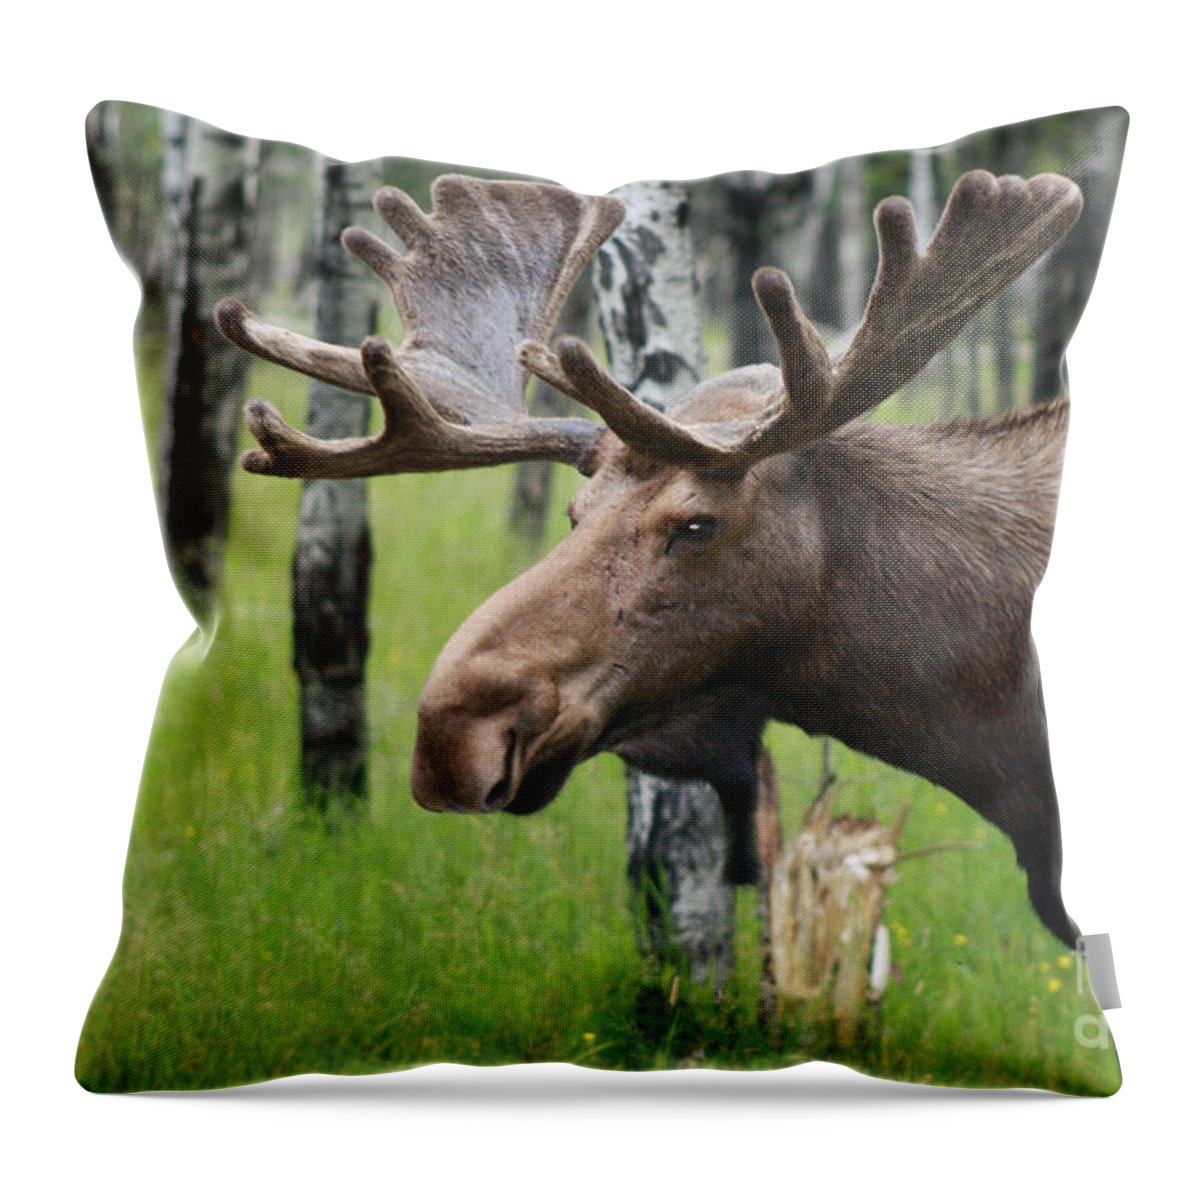 Big Throw Pillow featuring the photograph Bull Moose Portrait by Cathy Beharriell